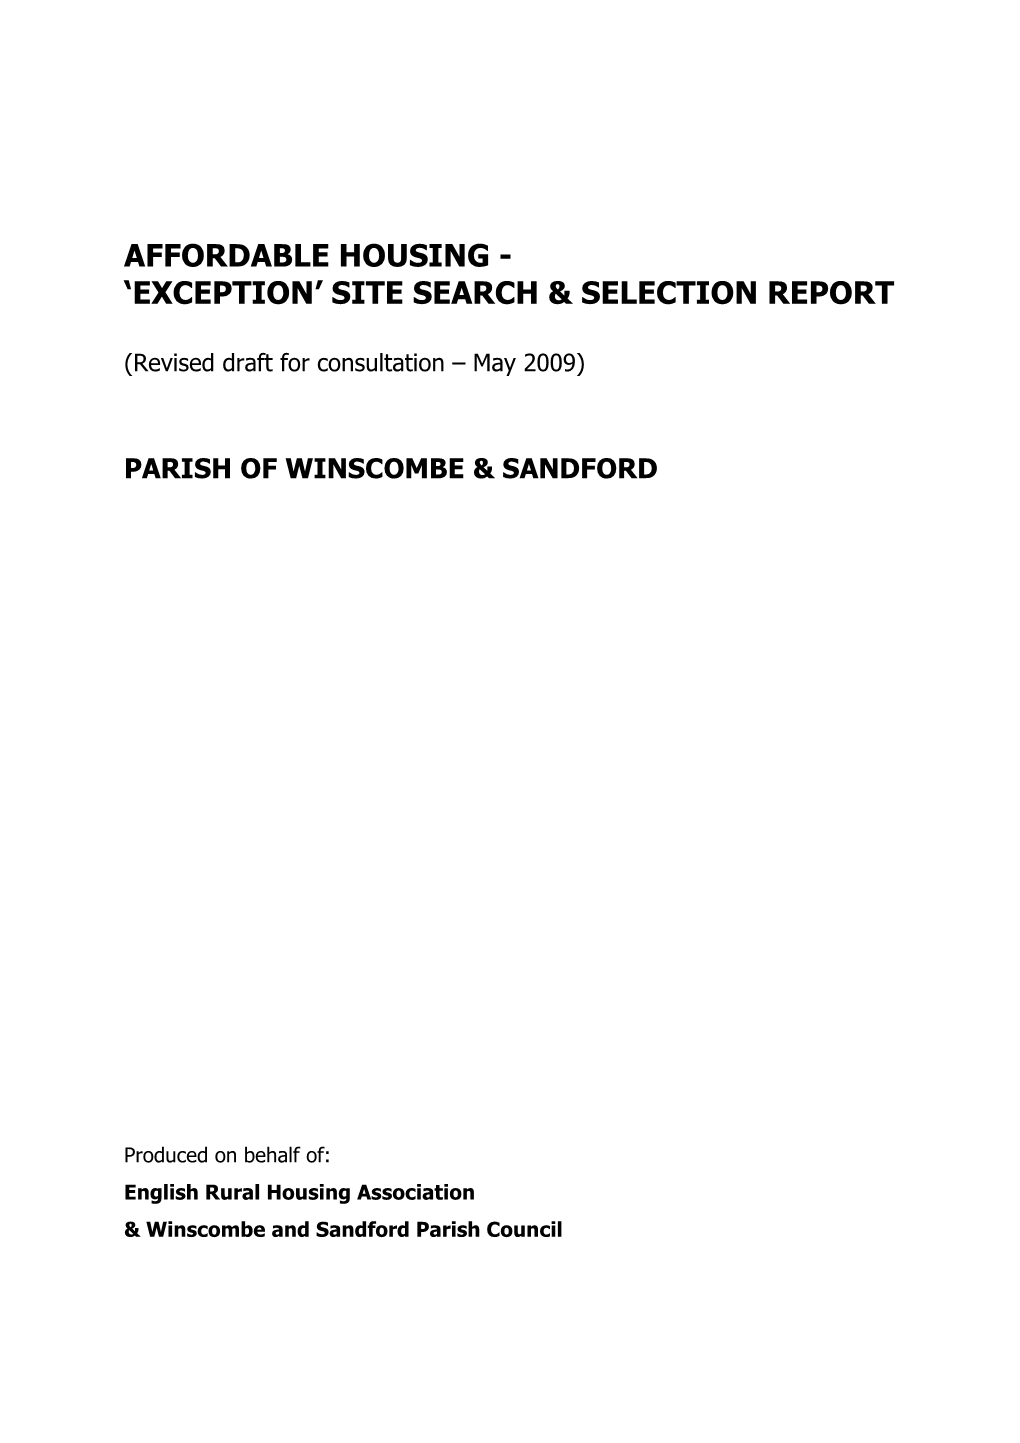 Affordable Housing - ‘Exception’ Site Search & Selection Report